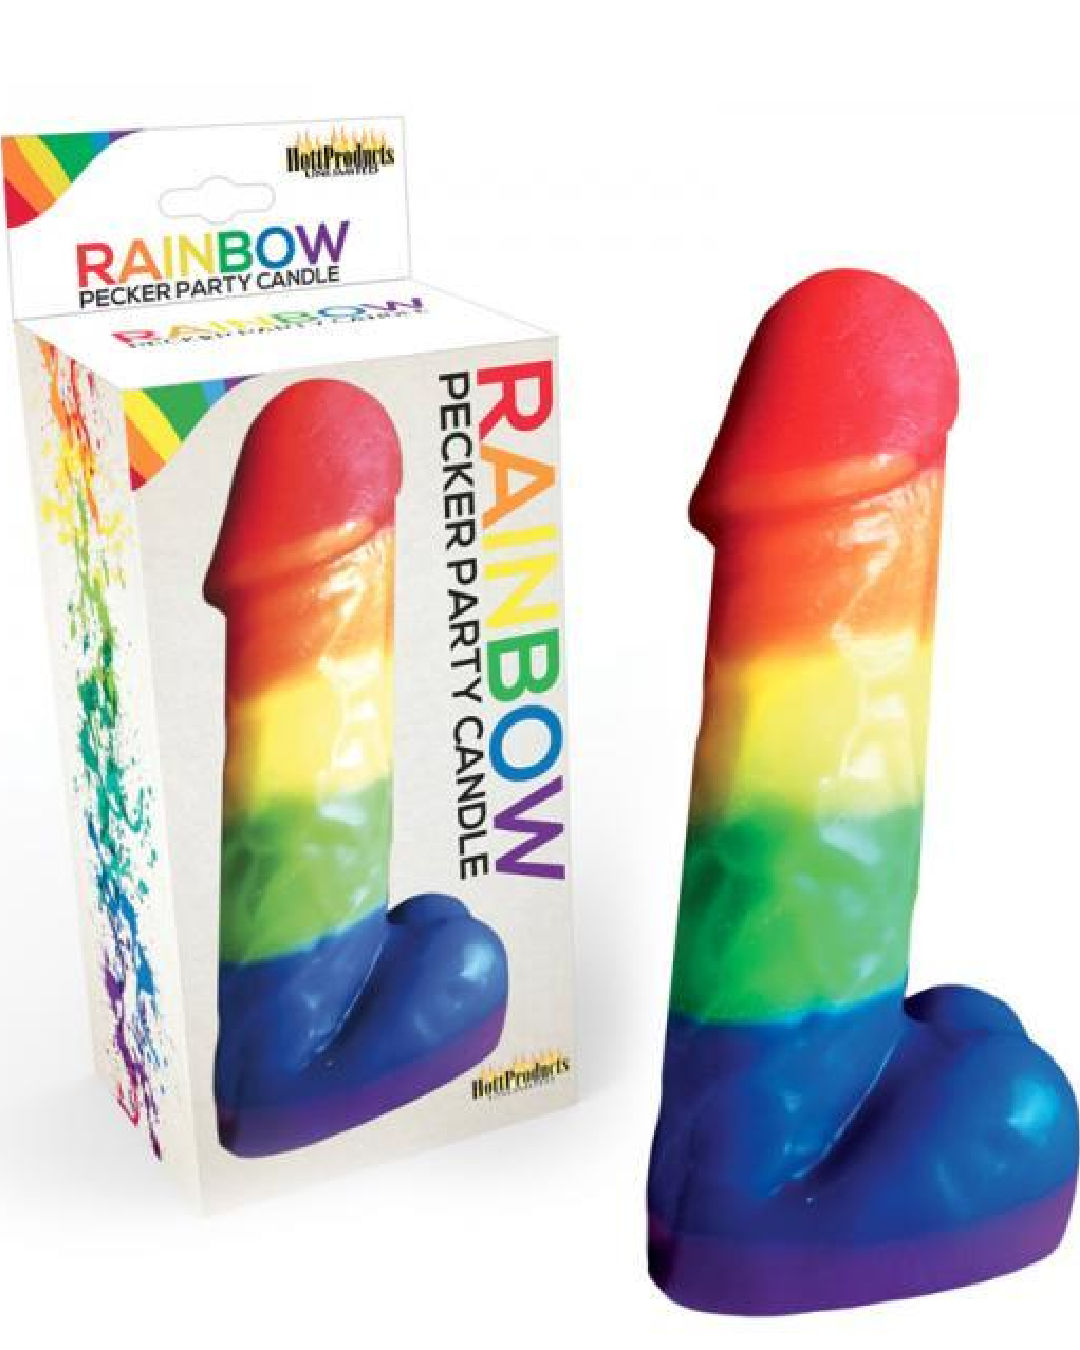 Rainbow Pecker 7 Inch Pride Candle next to product box 